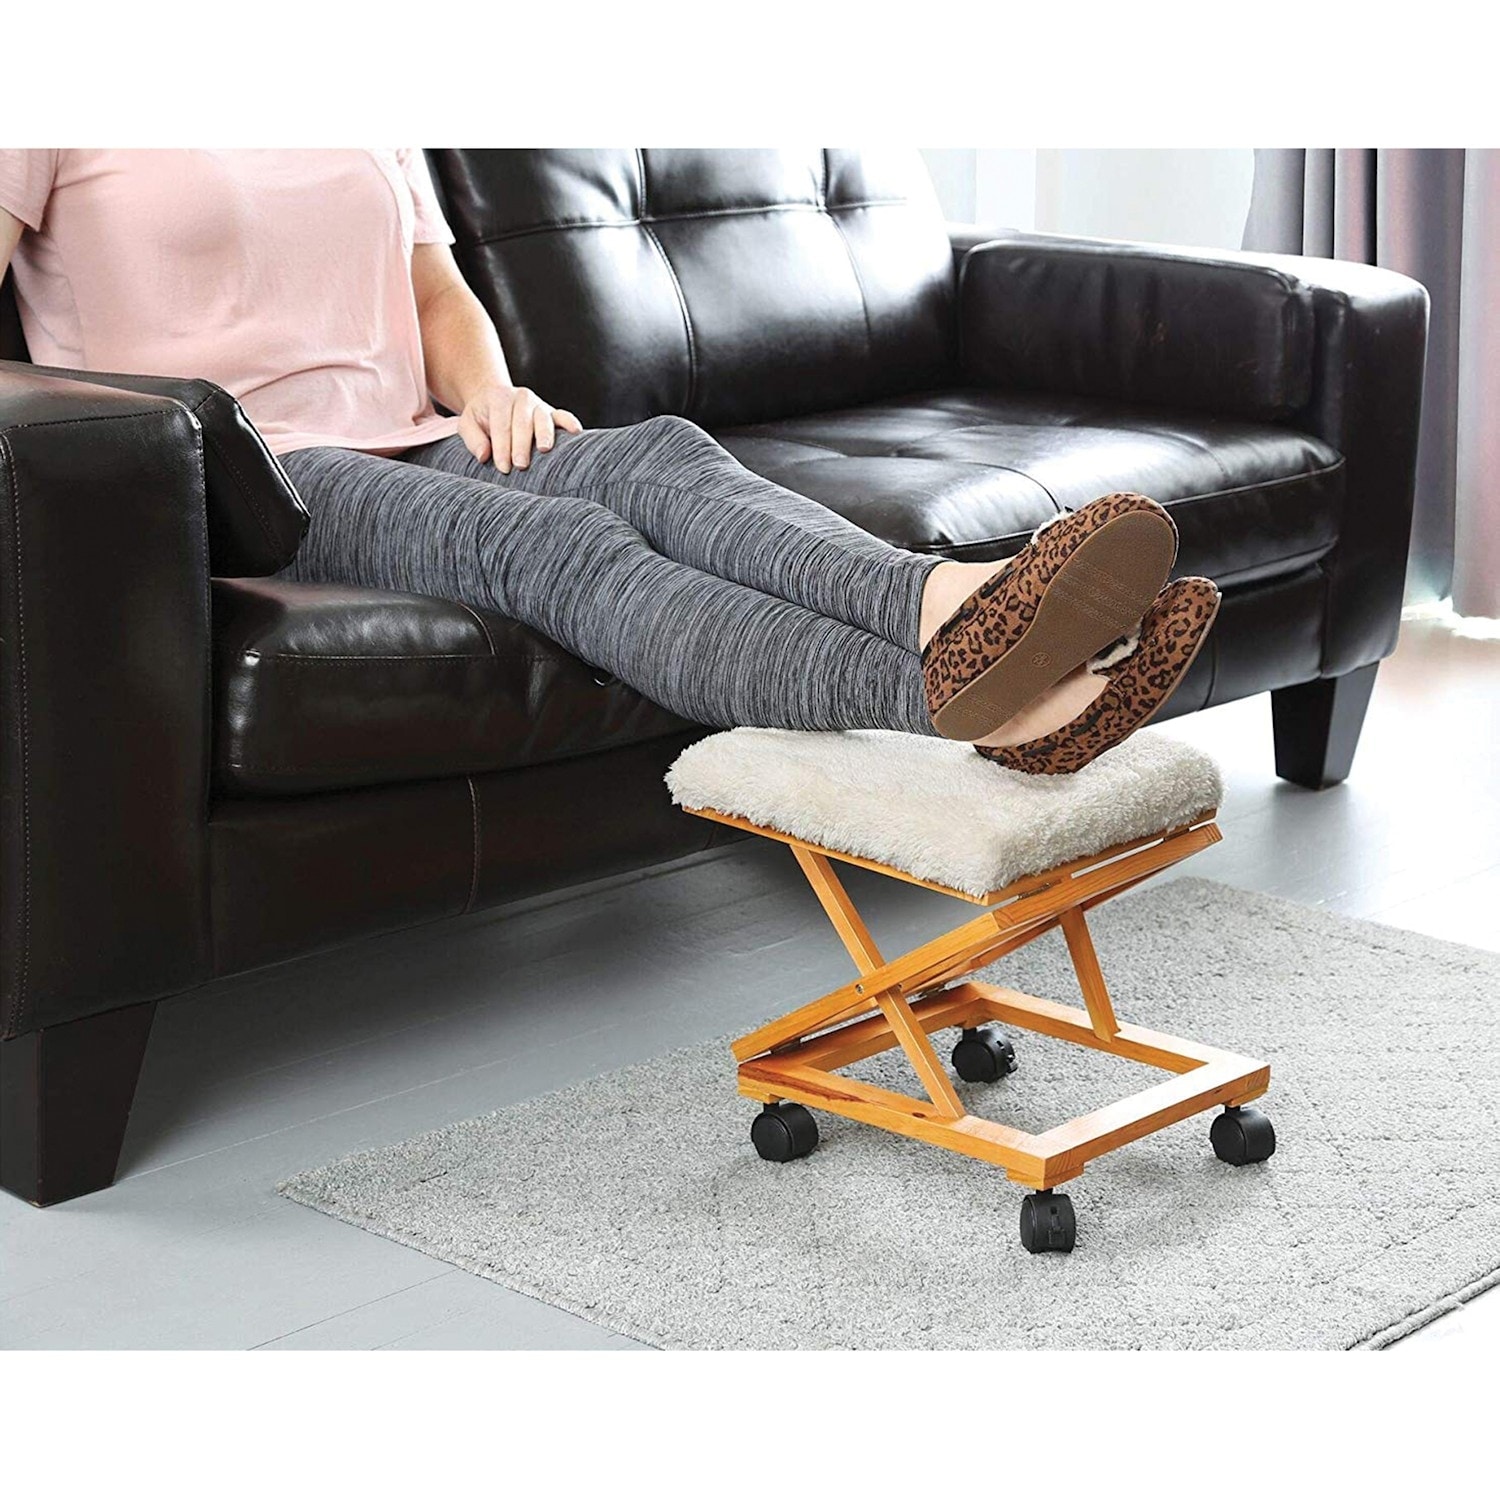 https://ak1.ostkcdn.com/images/products/is/images/direct/e99437878982103400267f9bc16346f6efa37022/Etna-Products-Portable-Sherpa-Top-Folding-Foot-Stool---Collapsible-Cushioned-Ottoman.jpg